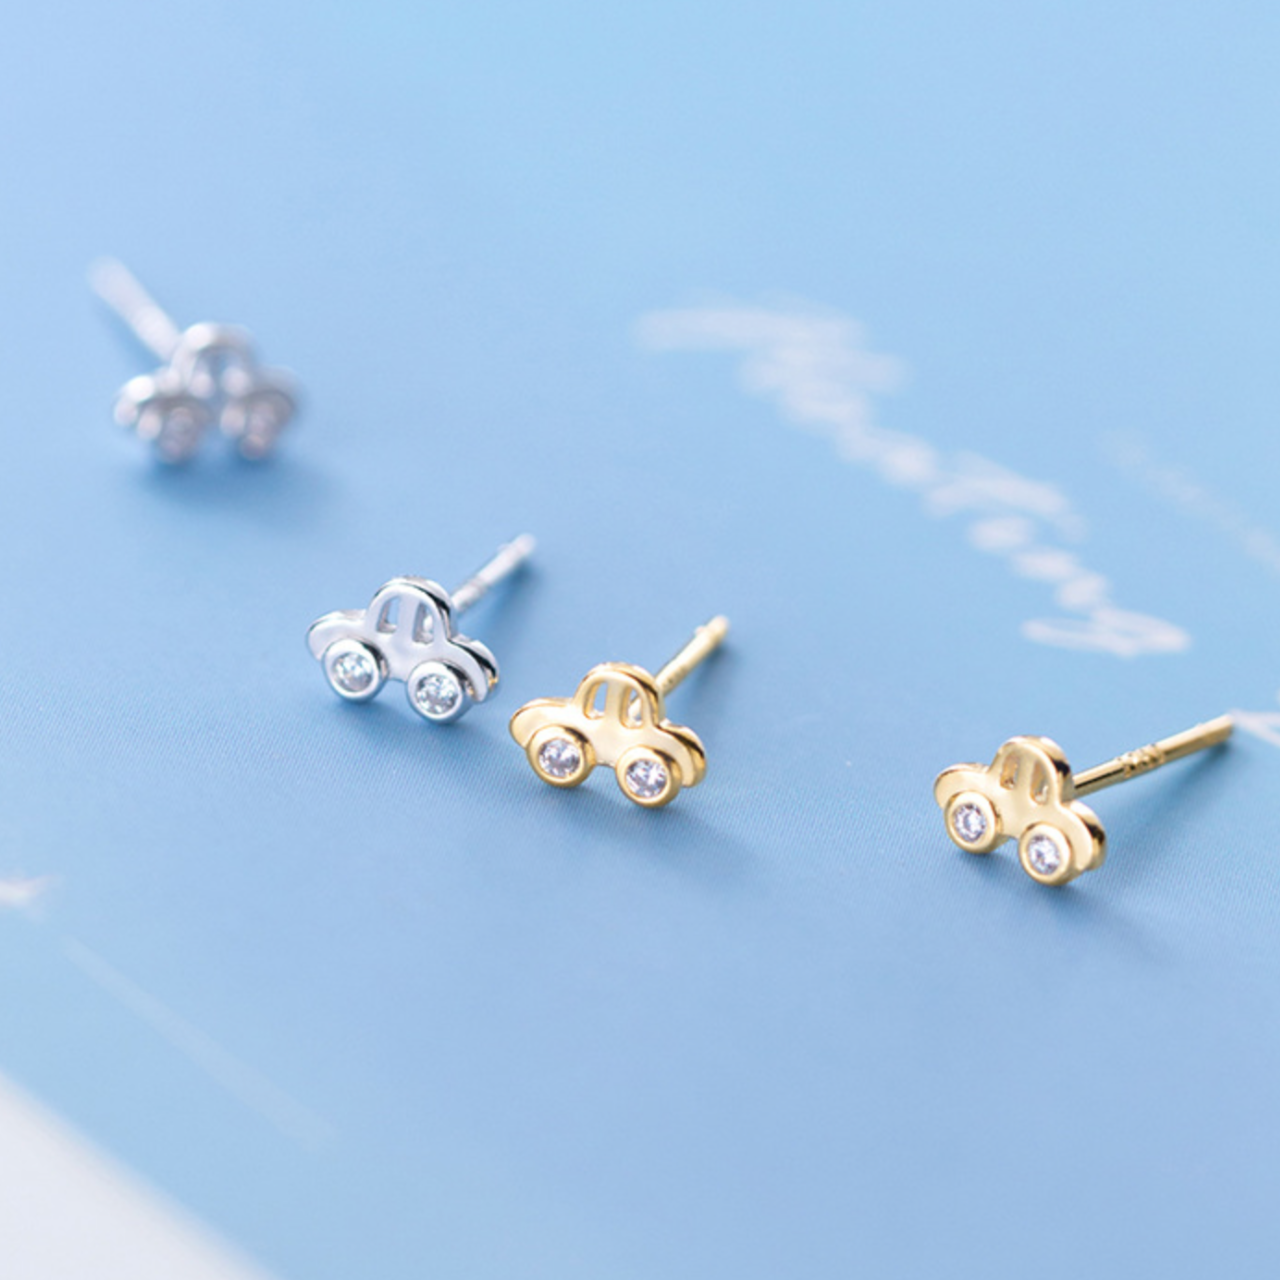 Tiny Car Stud Earrings with Crystal Details